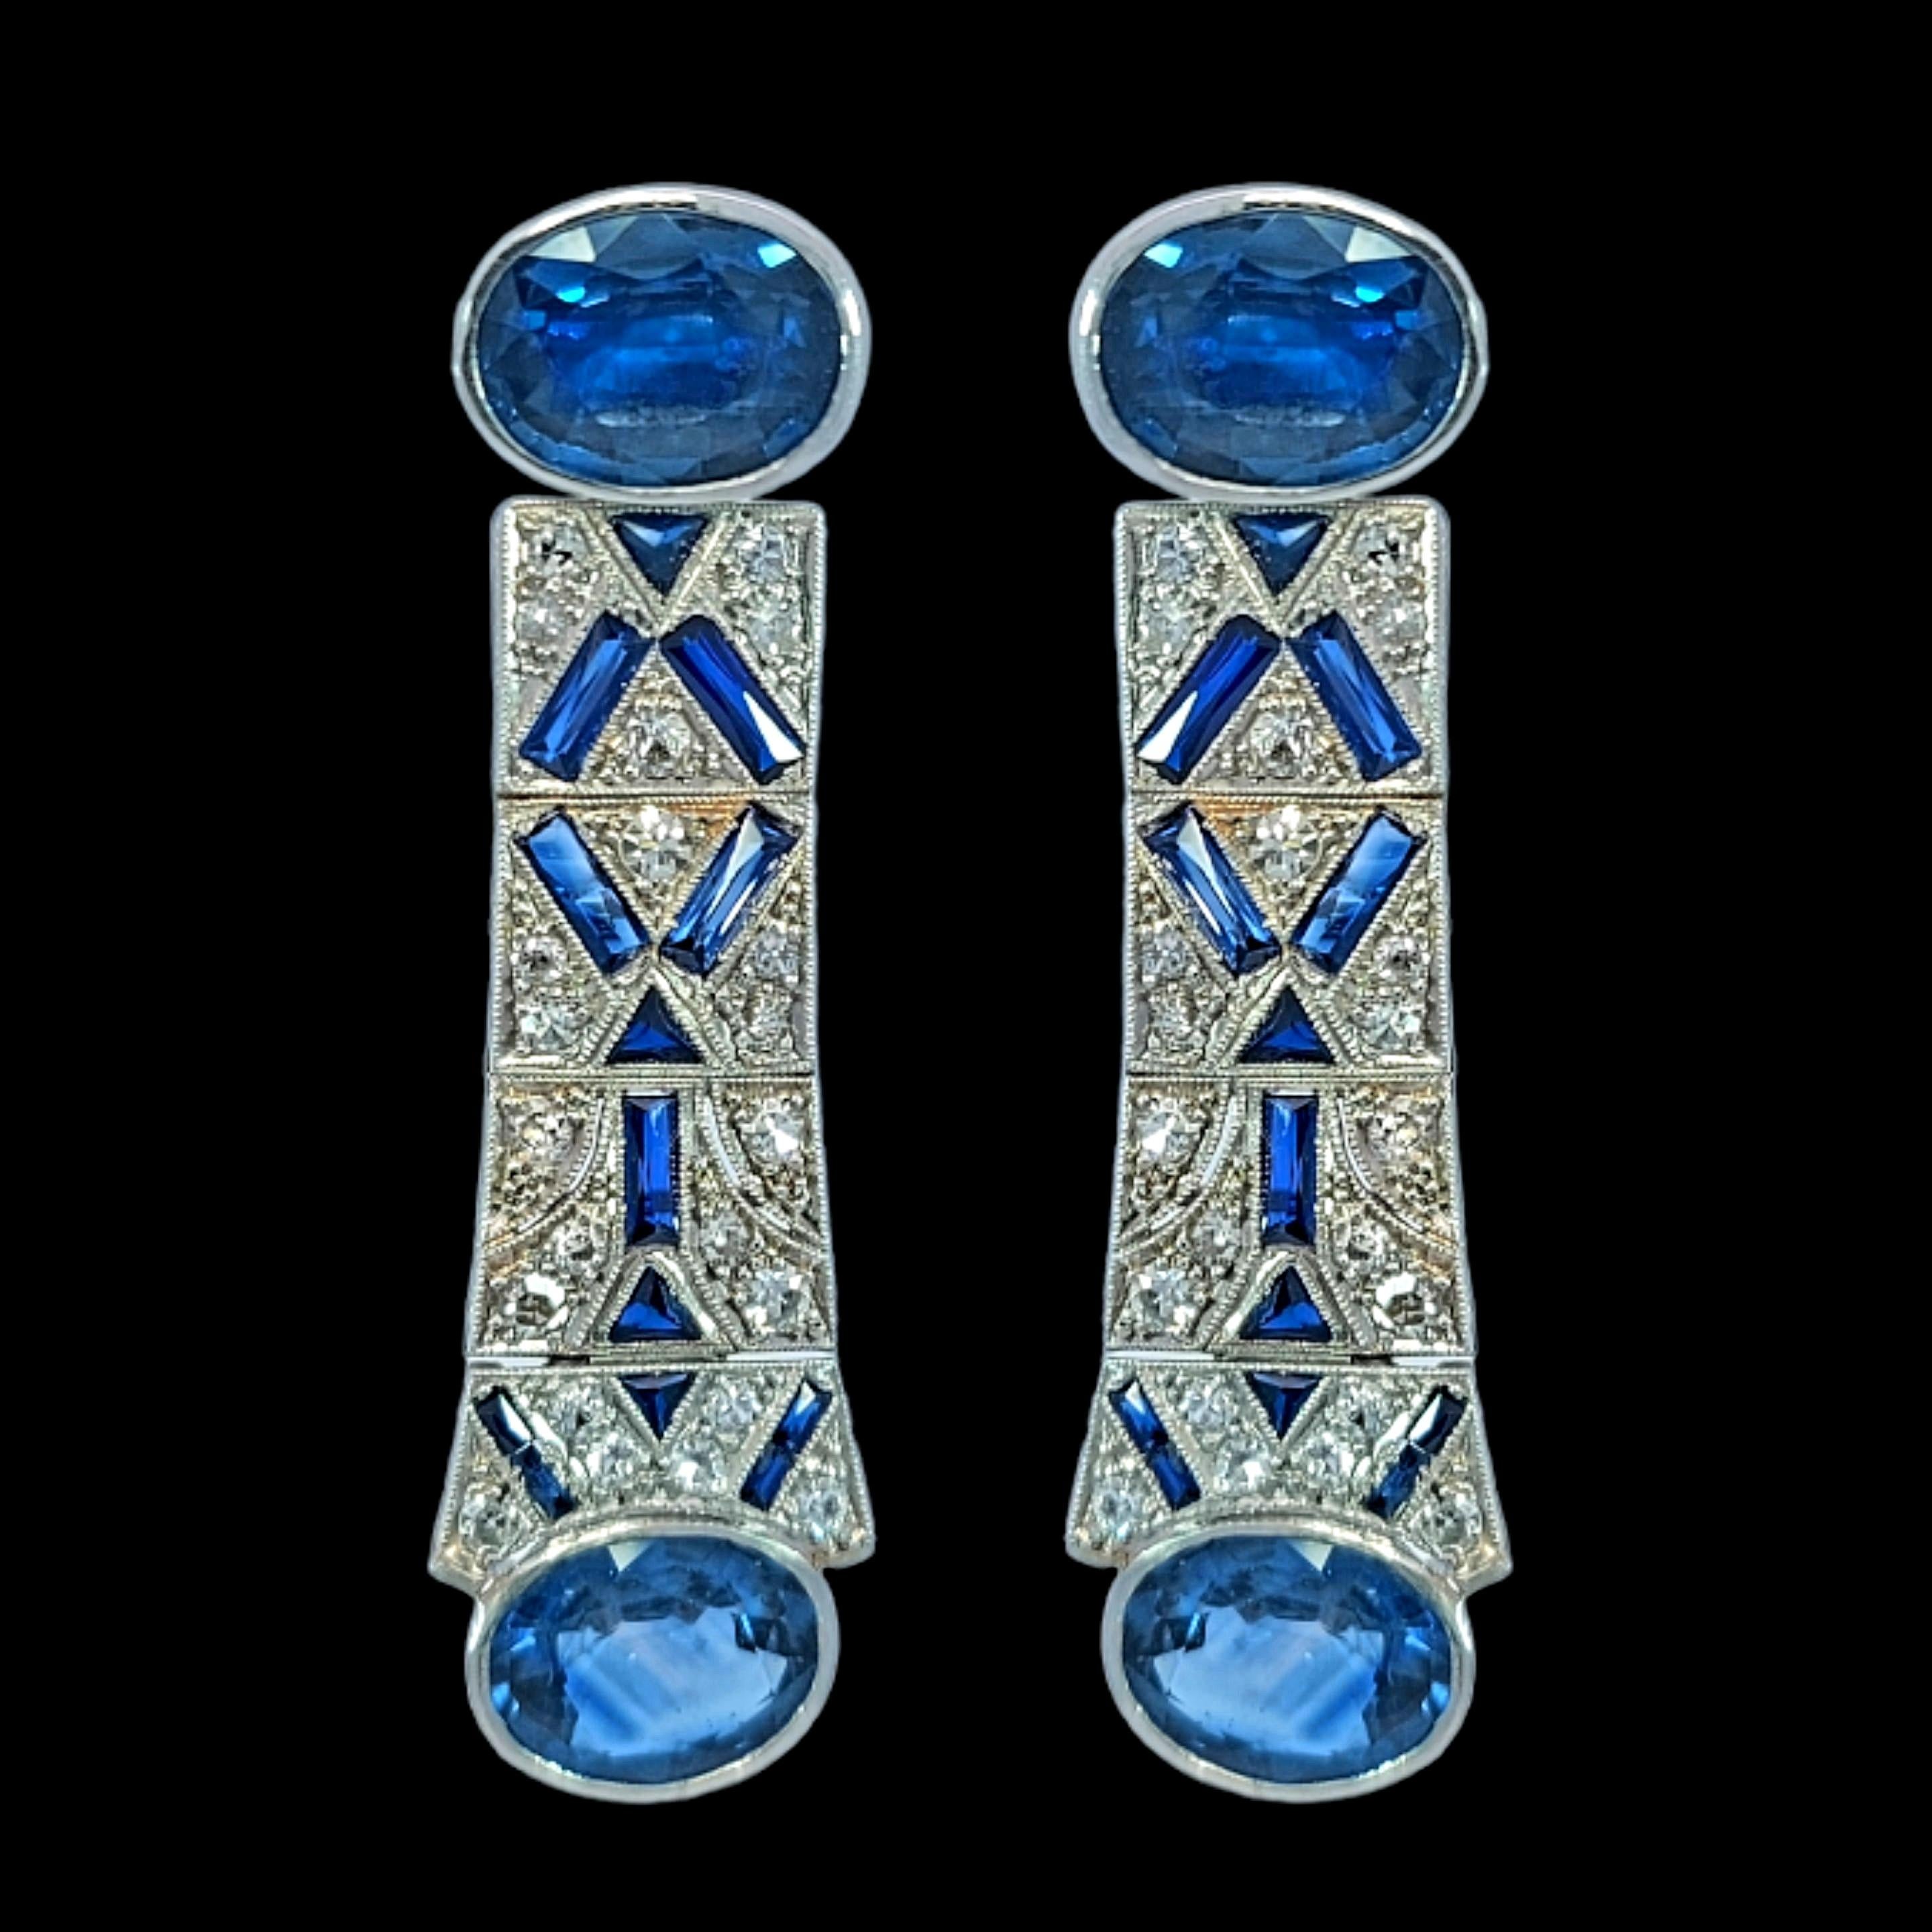 Artisan Platinum Earrings with 12 Ct. Sapphires & 1.3 Ct Diamonds For Sale